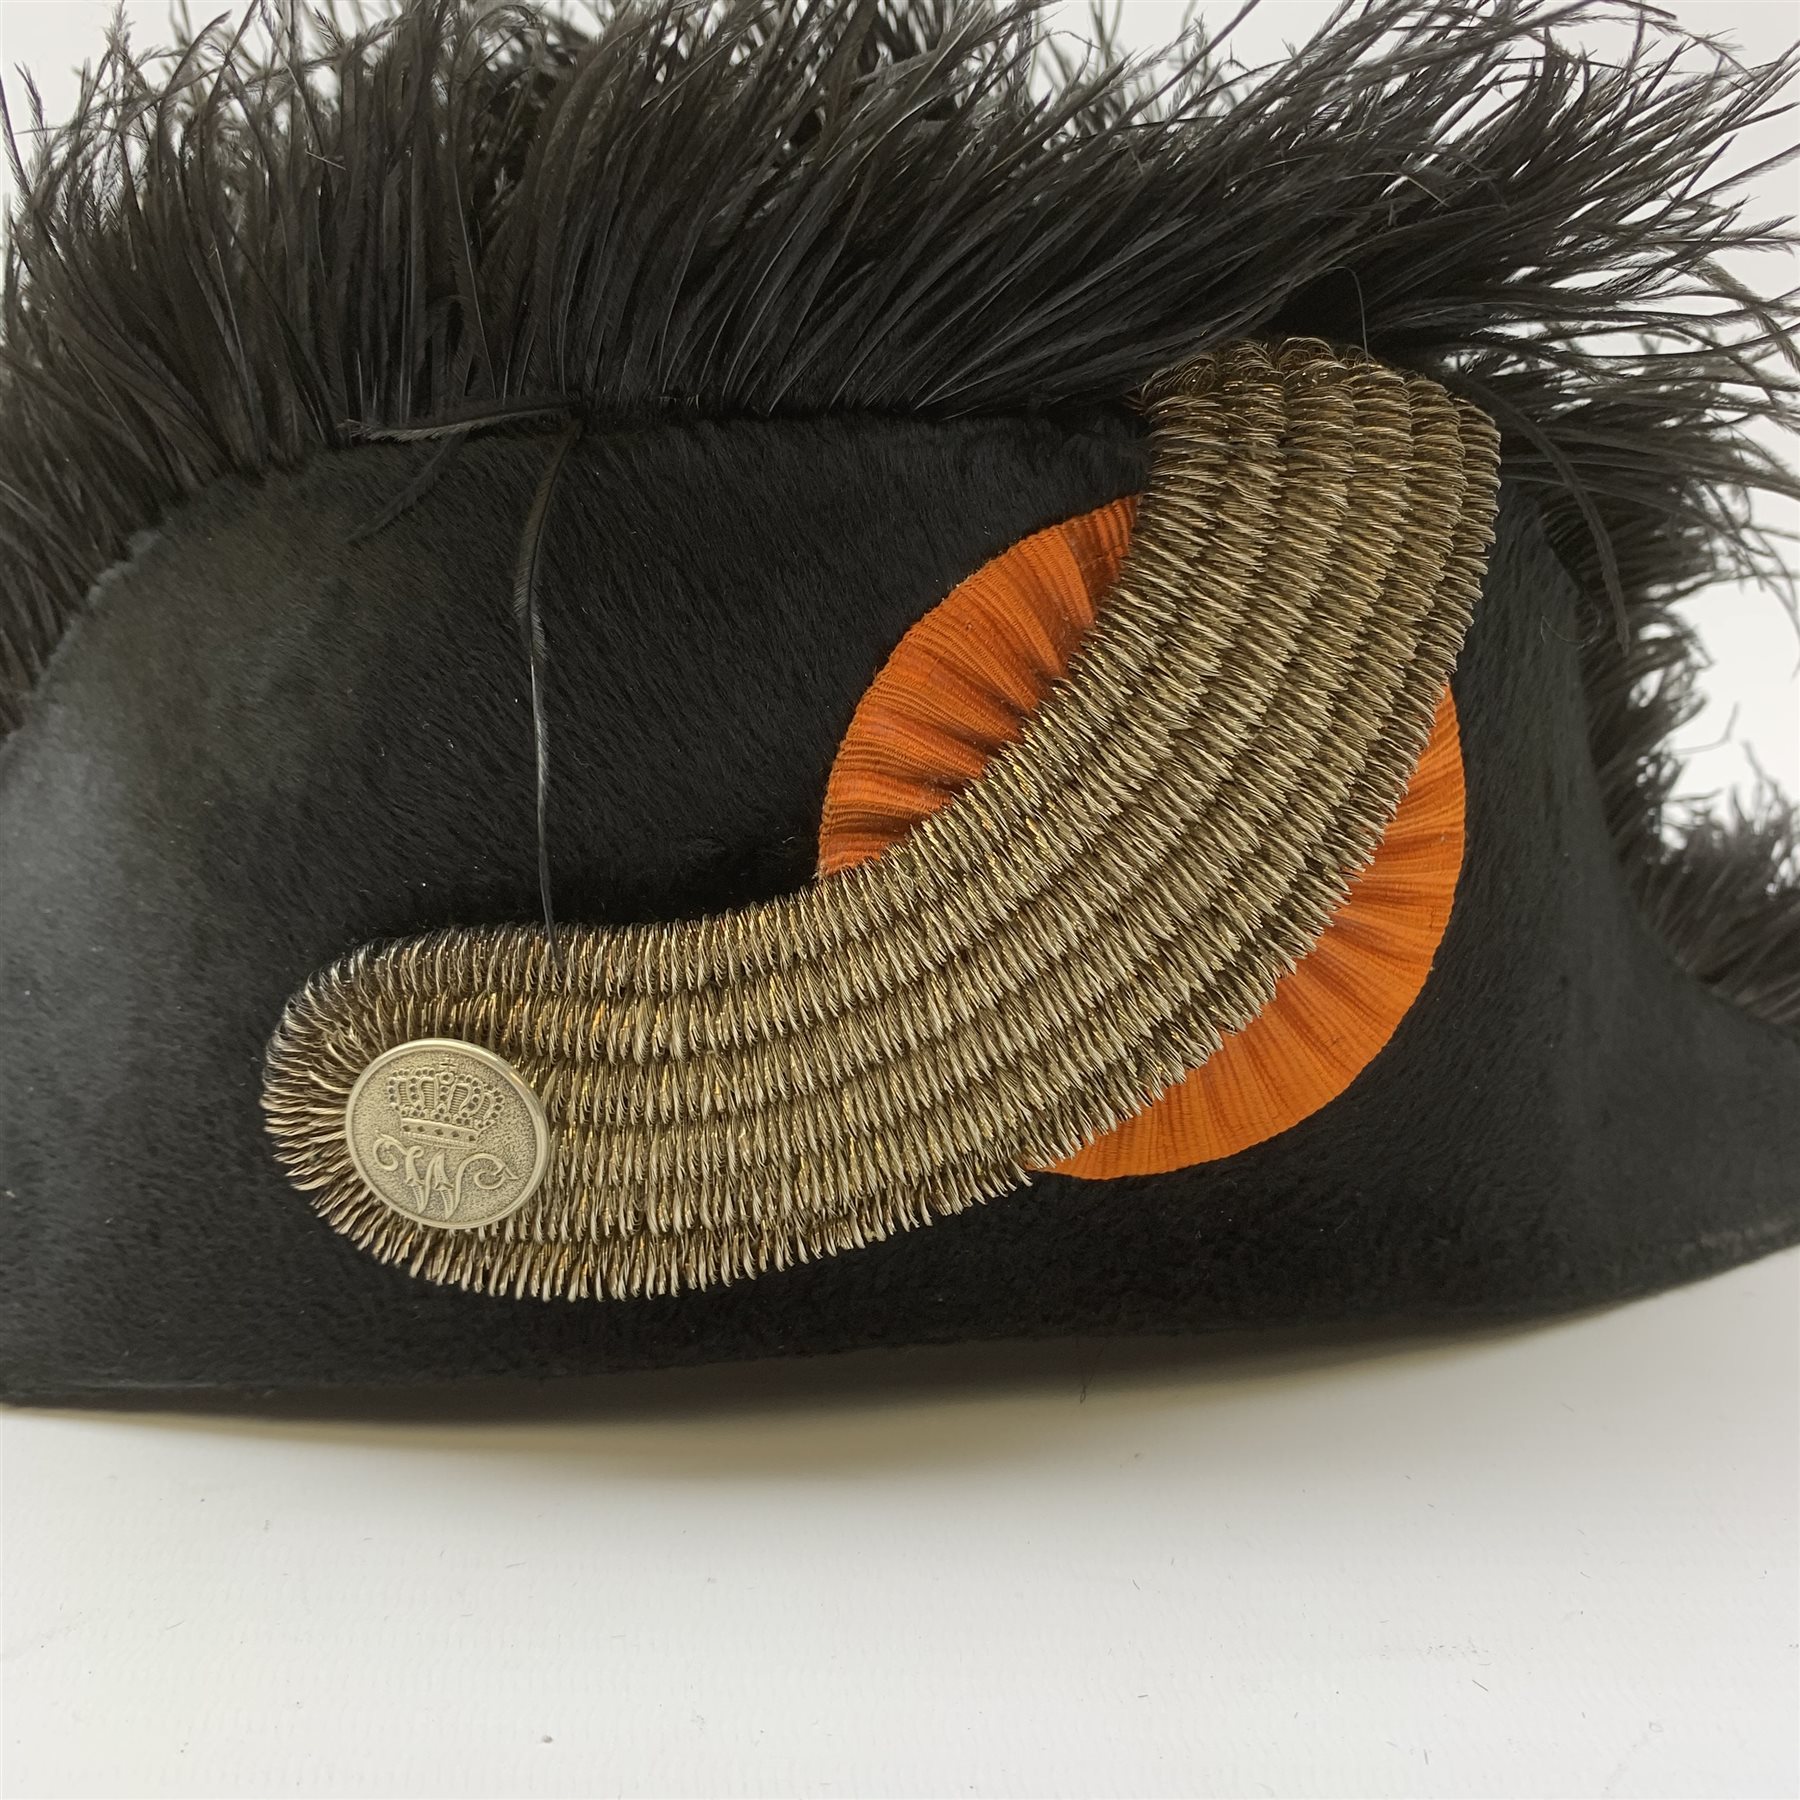 19th century cocked hat, probably French Naval officers, with black moleskin finish and ostrich feat - Image 7 of 7